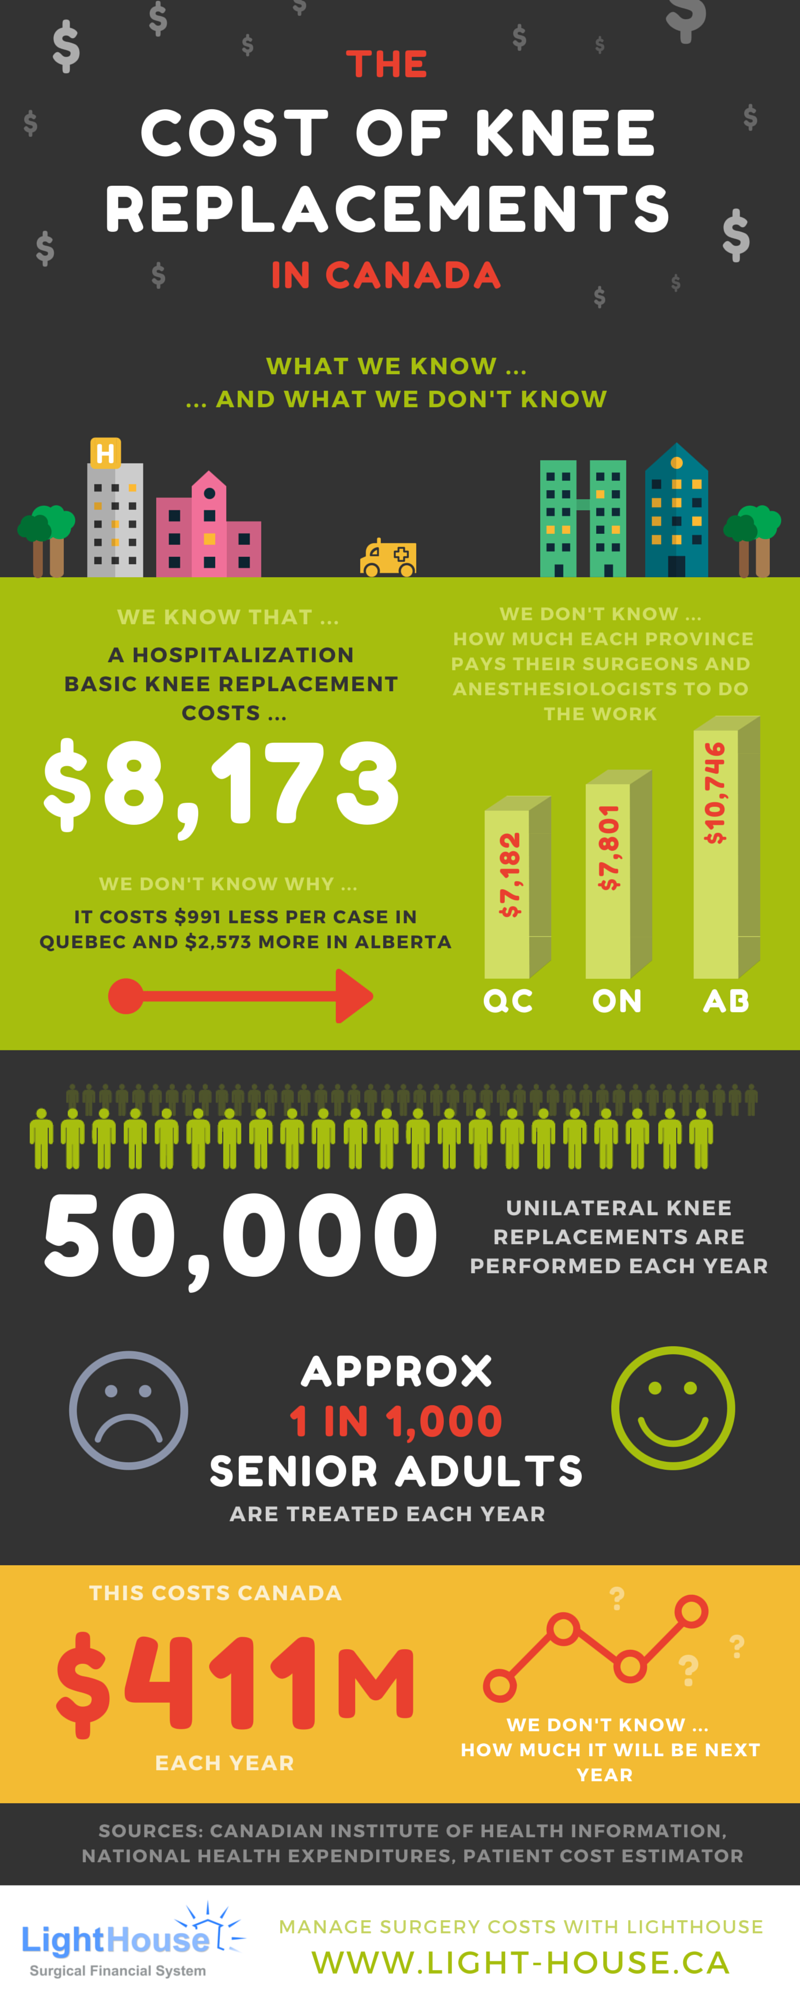 The cost of a knee replacement in Canada